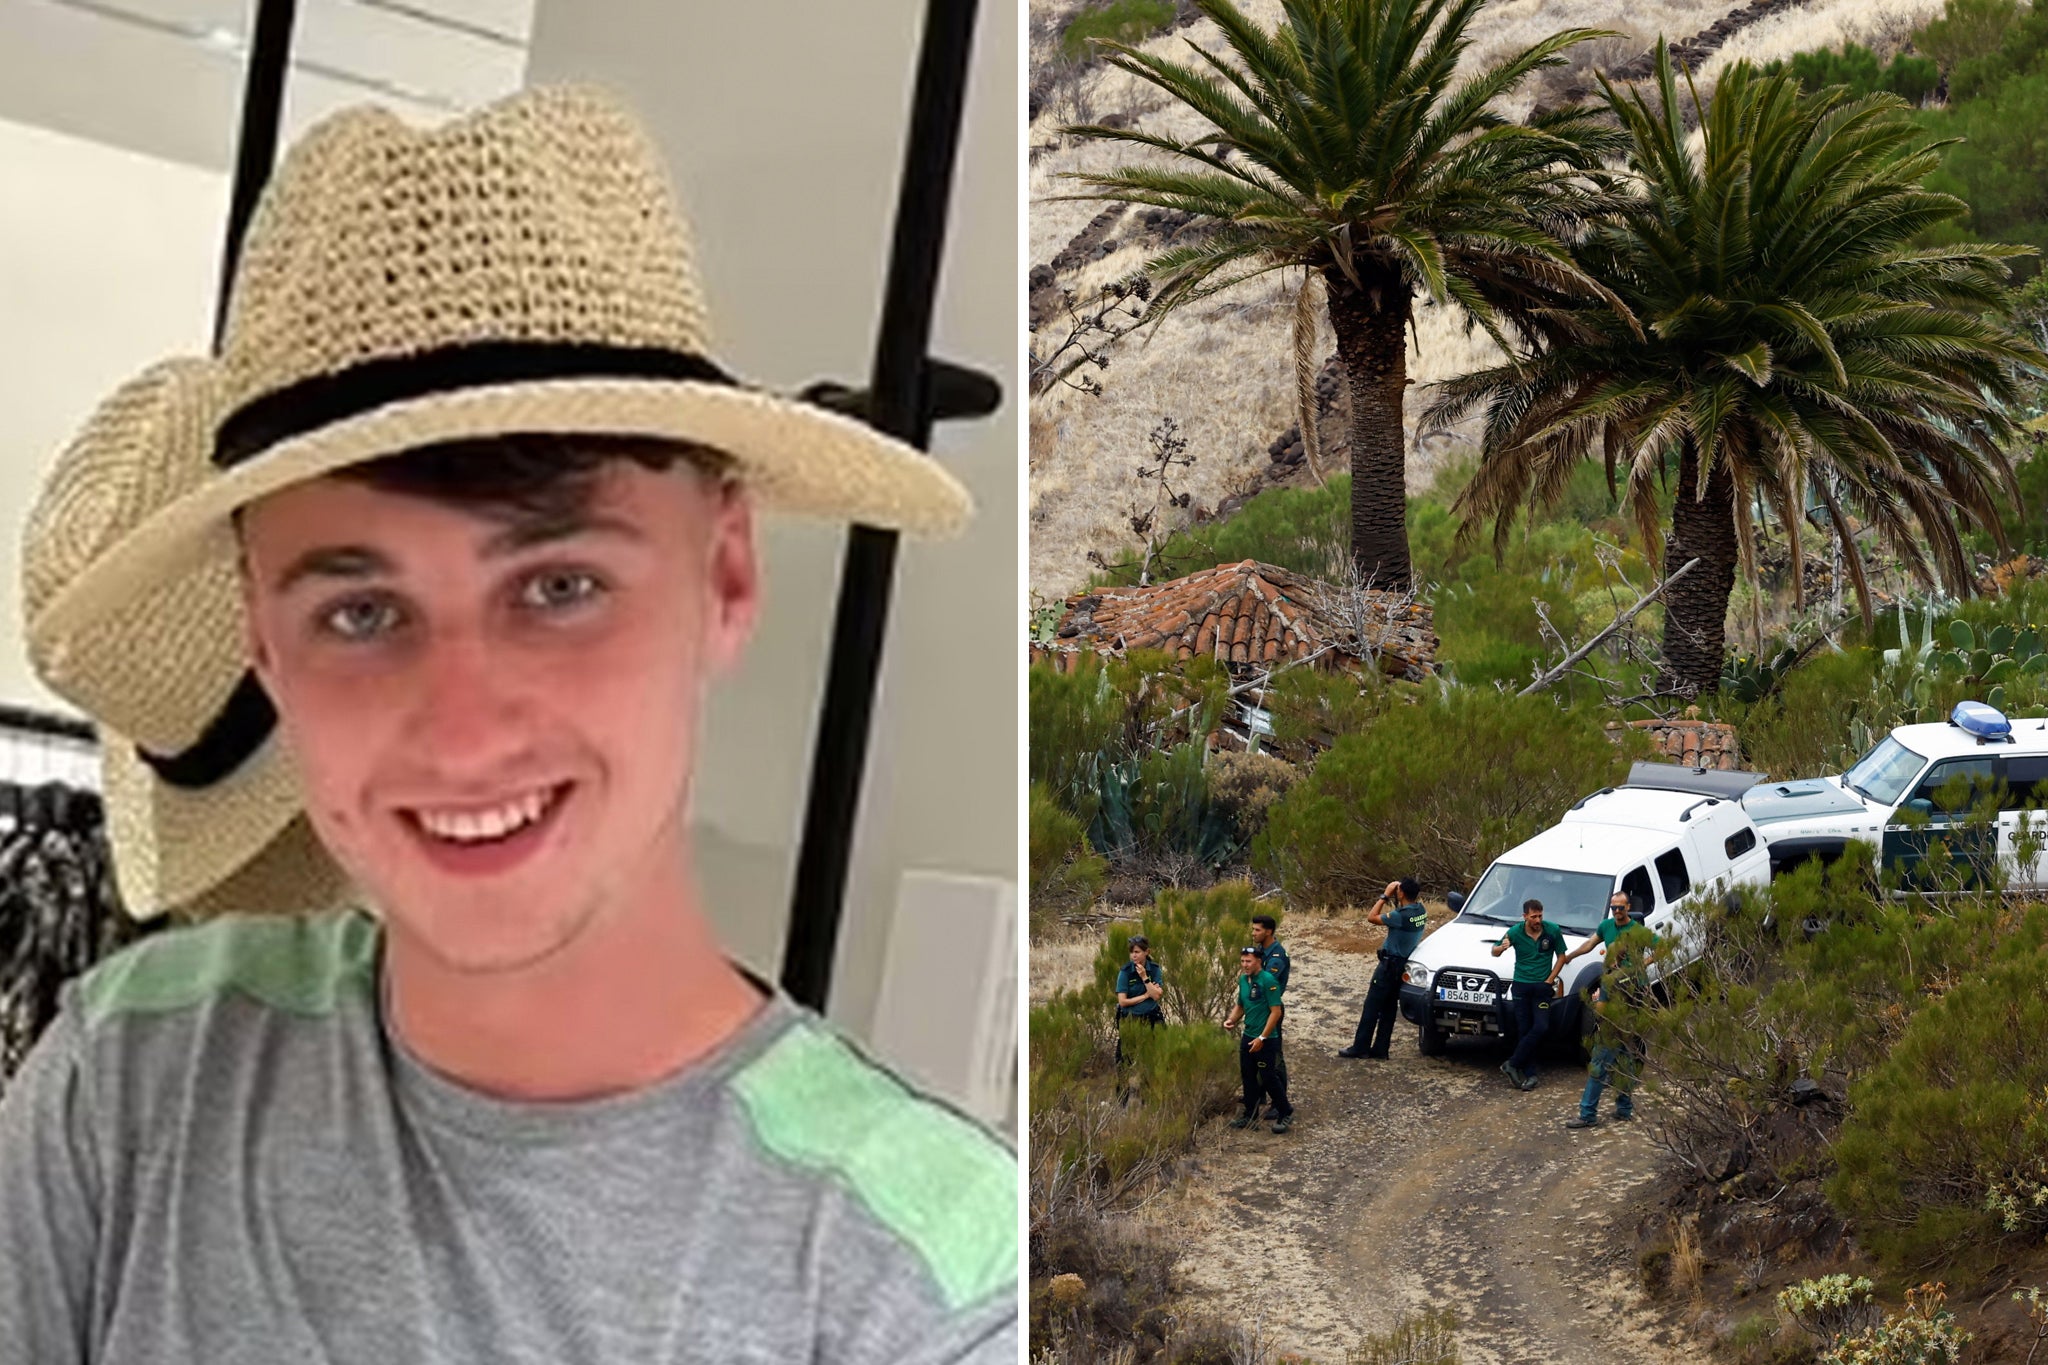 The 19-year-old disappeared on June 17 near Buenavista del Norte, after travelling there with two men he had met at a festival around 27 miles further south on the island.